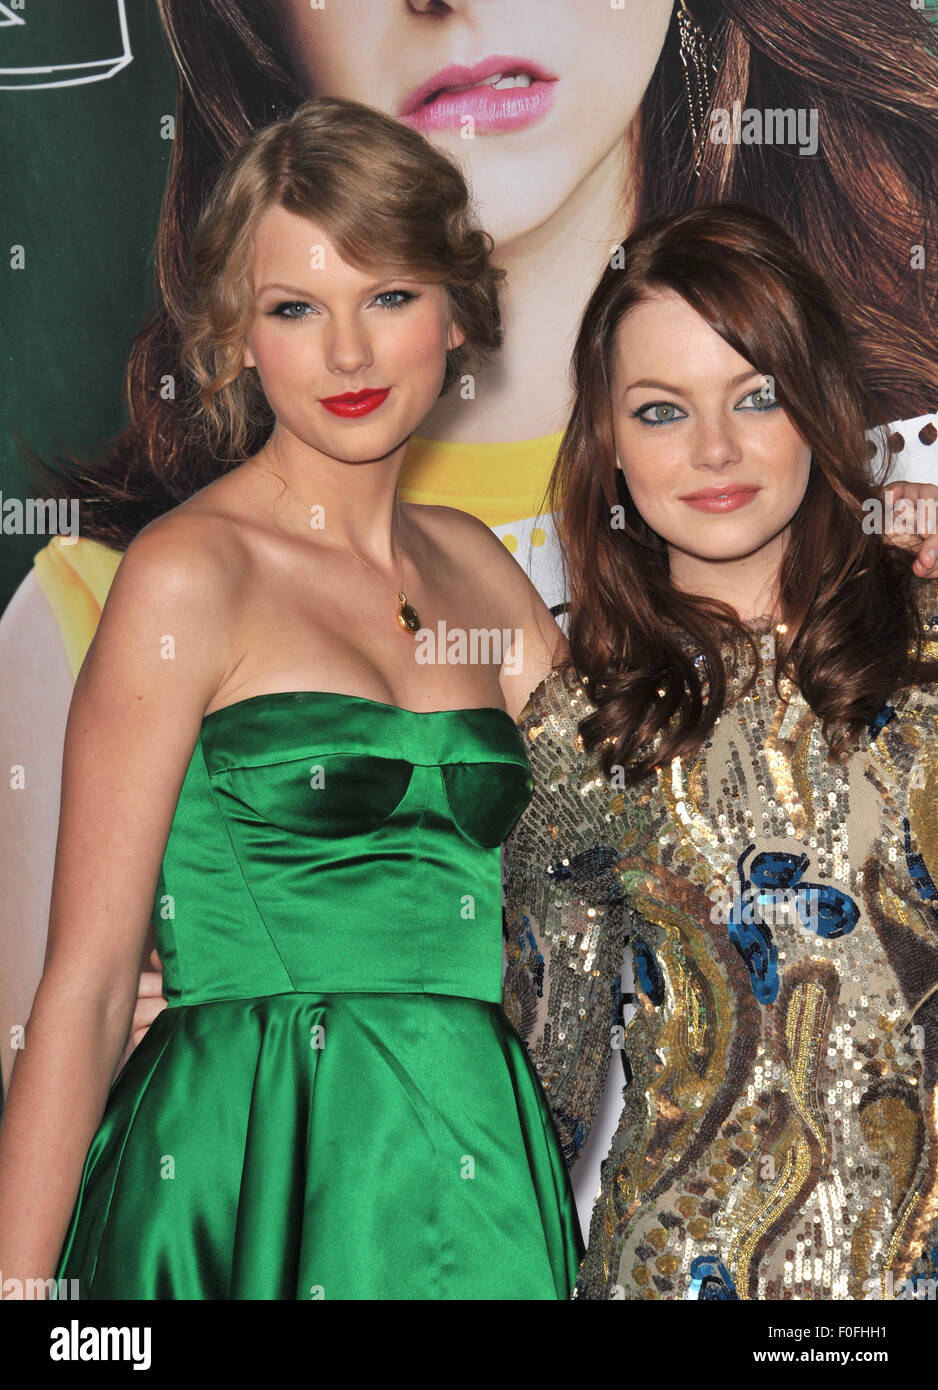 LOS ANGELES, CA - SEPTEMBER 13, 2010: Emma Stone & Taylor Swift (in green) at the premiere of Stone's new movie 'Easy A' at Grauman's Chinese Theatre, Hollywood. Stock Photo